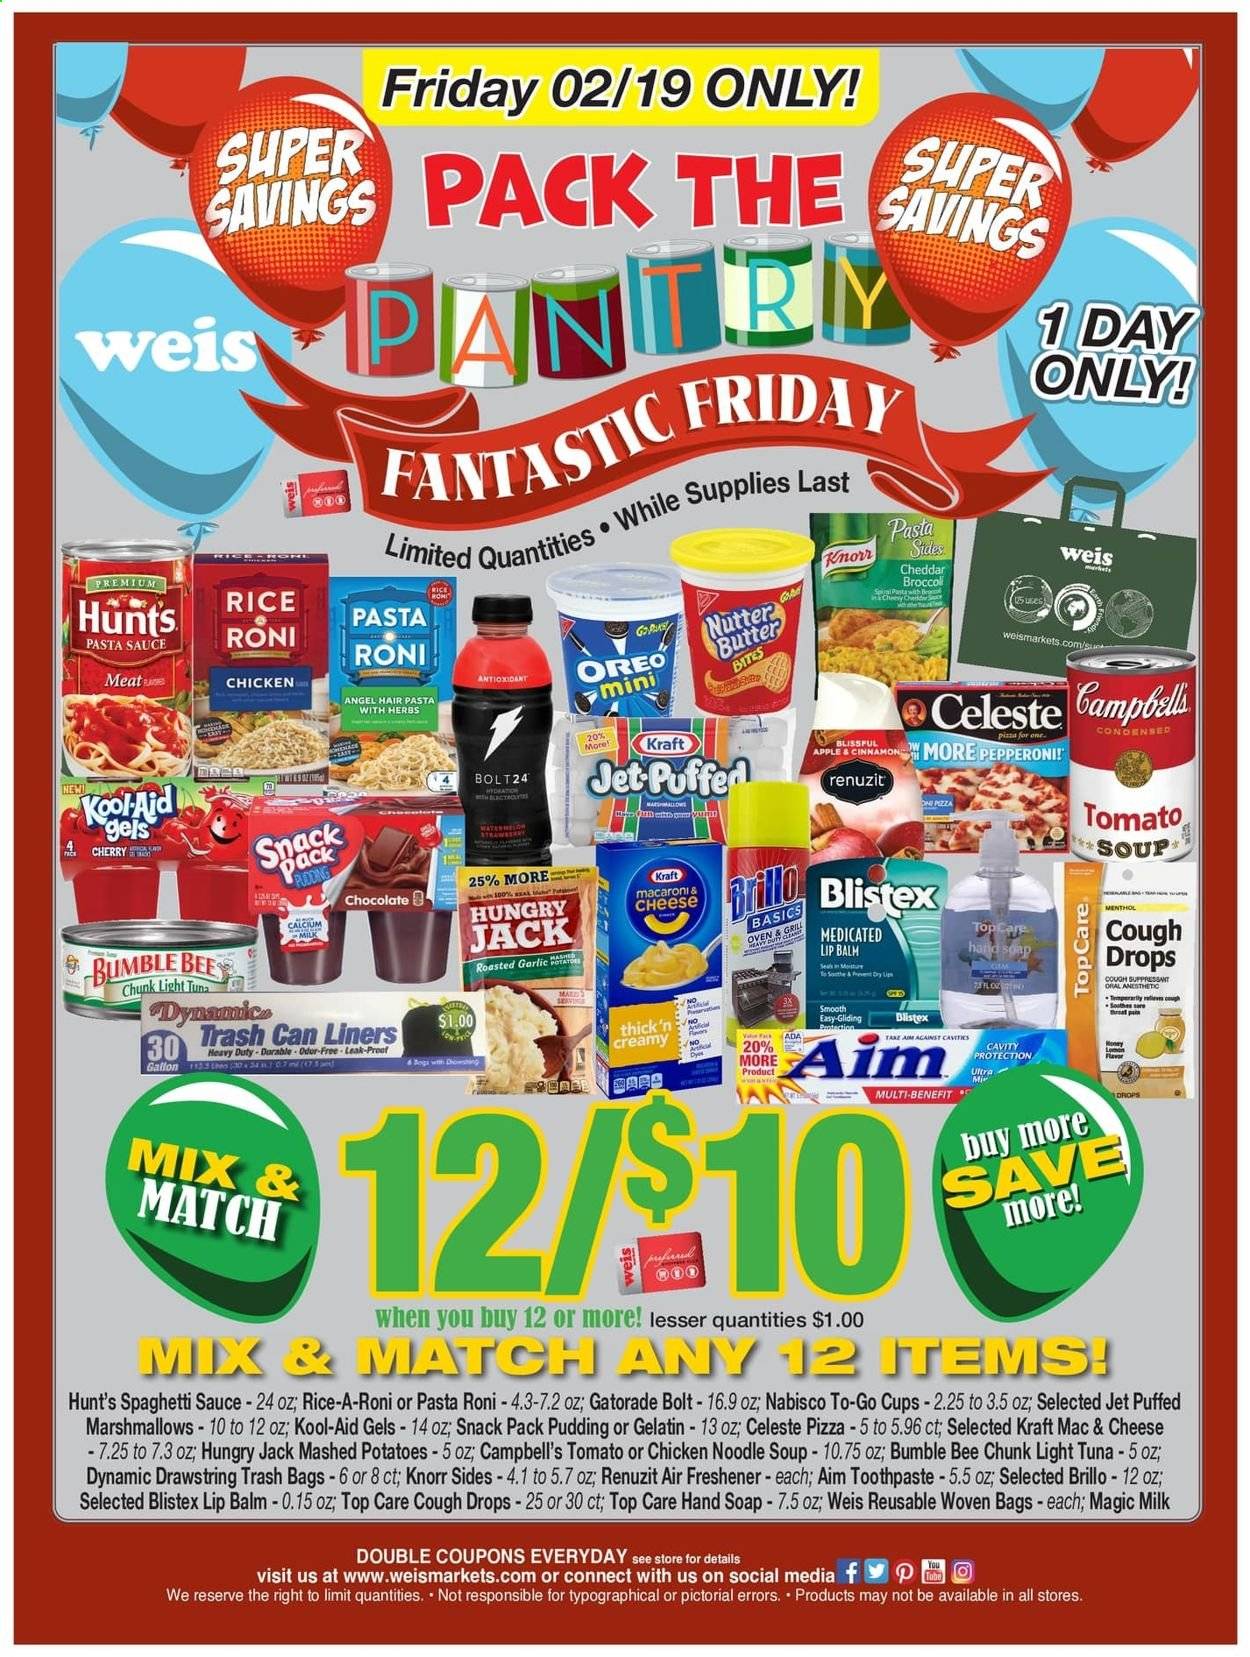 thumbnail - Weis Flyer - 02/19/2021 - 02/19/2021 - Sales products - tuna, Campbell's, macaroni & cheese, mashed potatoes, tomato soup, pizza, soup, Knorr, sauce, Kraft®, pepperoni, cheddar, pudding, Oreo, milk, butter, marshmallows, chocolate, garlic, light tuna, spaghetti sauce, rice, spaghetti, macaroni, noodles, herbs, cinnamon, pasta sauce, Gatorade, Celeste, Jet, hand soap, soap, toothpaste, lip balm, trash bags, cup, Renuzit, air freshener, calcium, gelatin, cough drops, watermelon. Page 1.